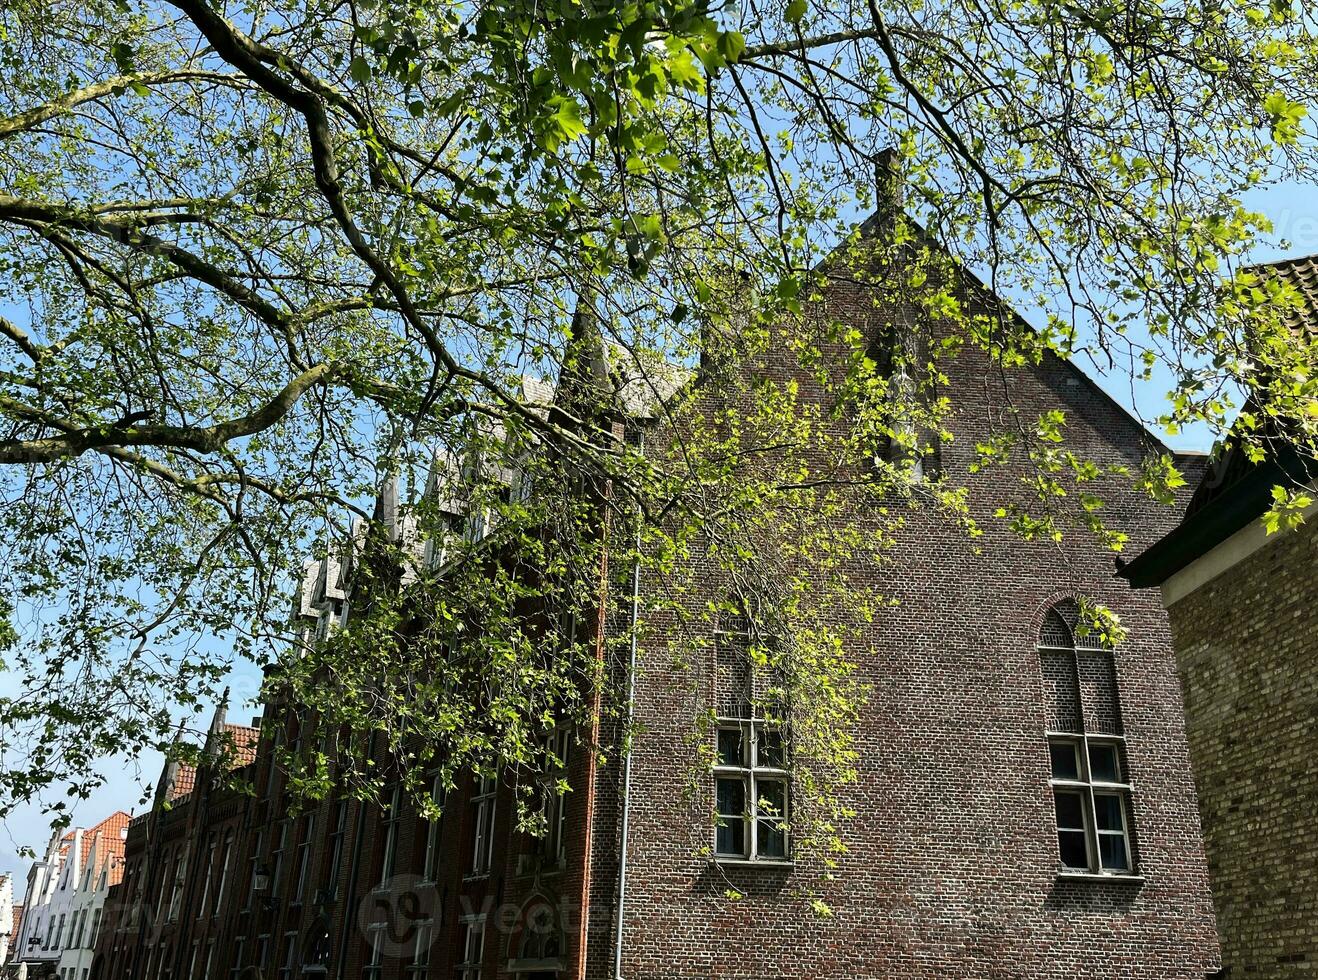 Traditional old-fashioned brick building in Minnewater park area in Brugge, Belgium, on spring sunny day, famous tourist attraction, popular landmark, classic cityscape for postcard or poster concept photo